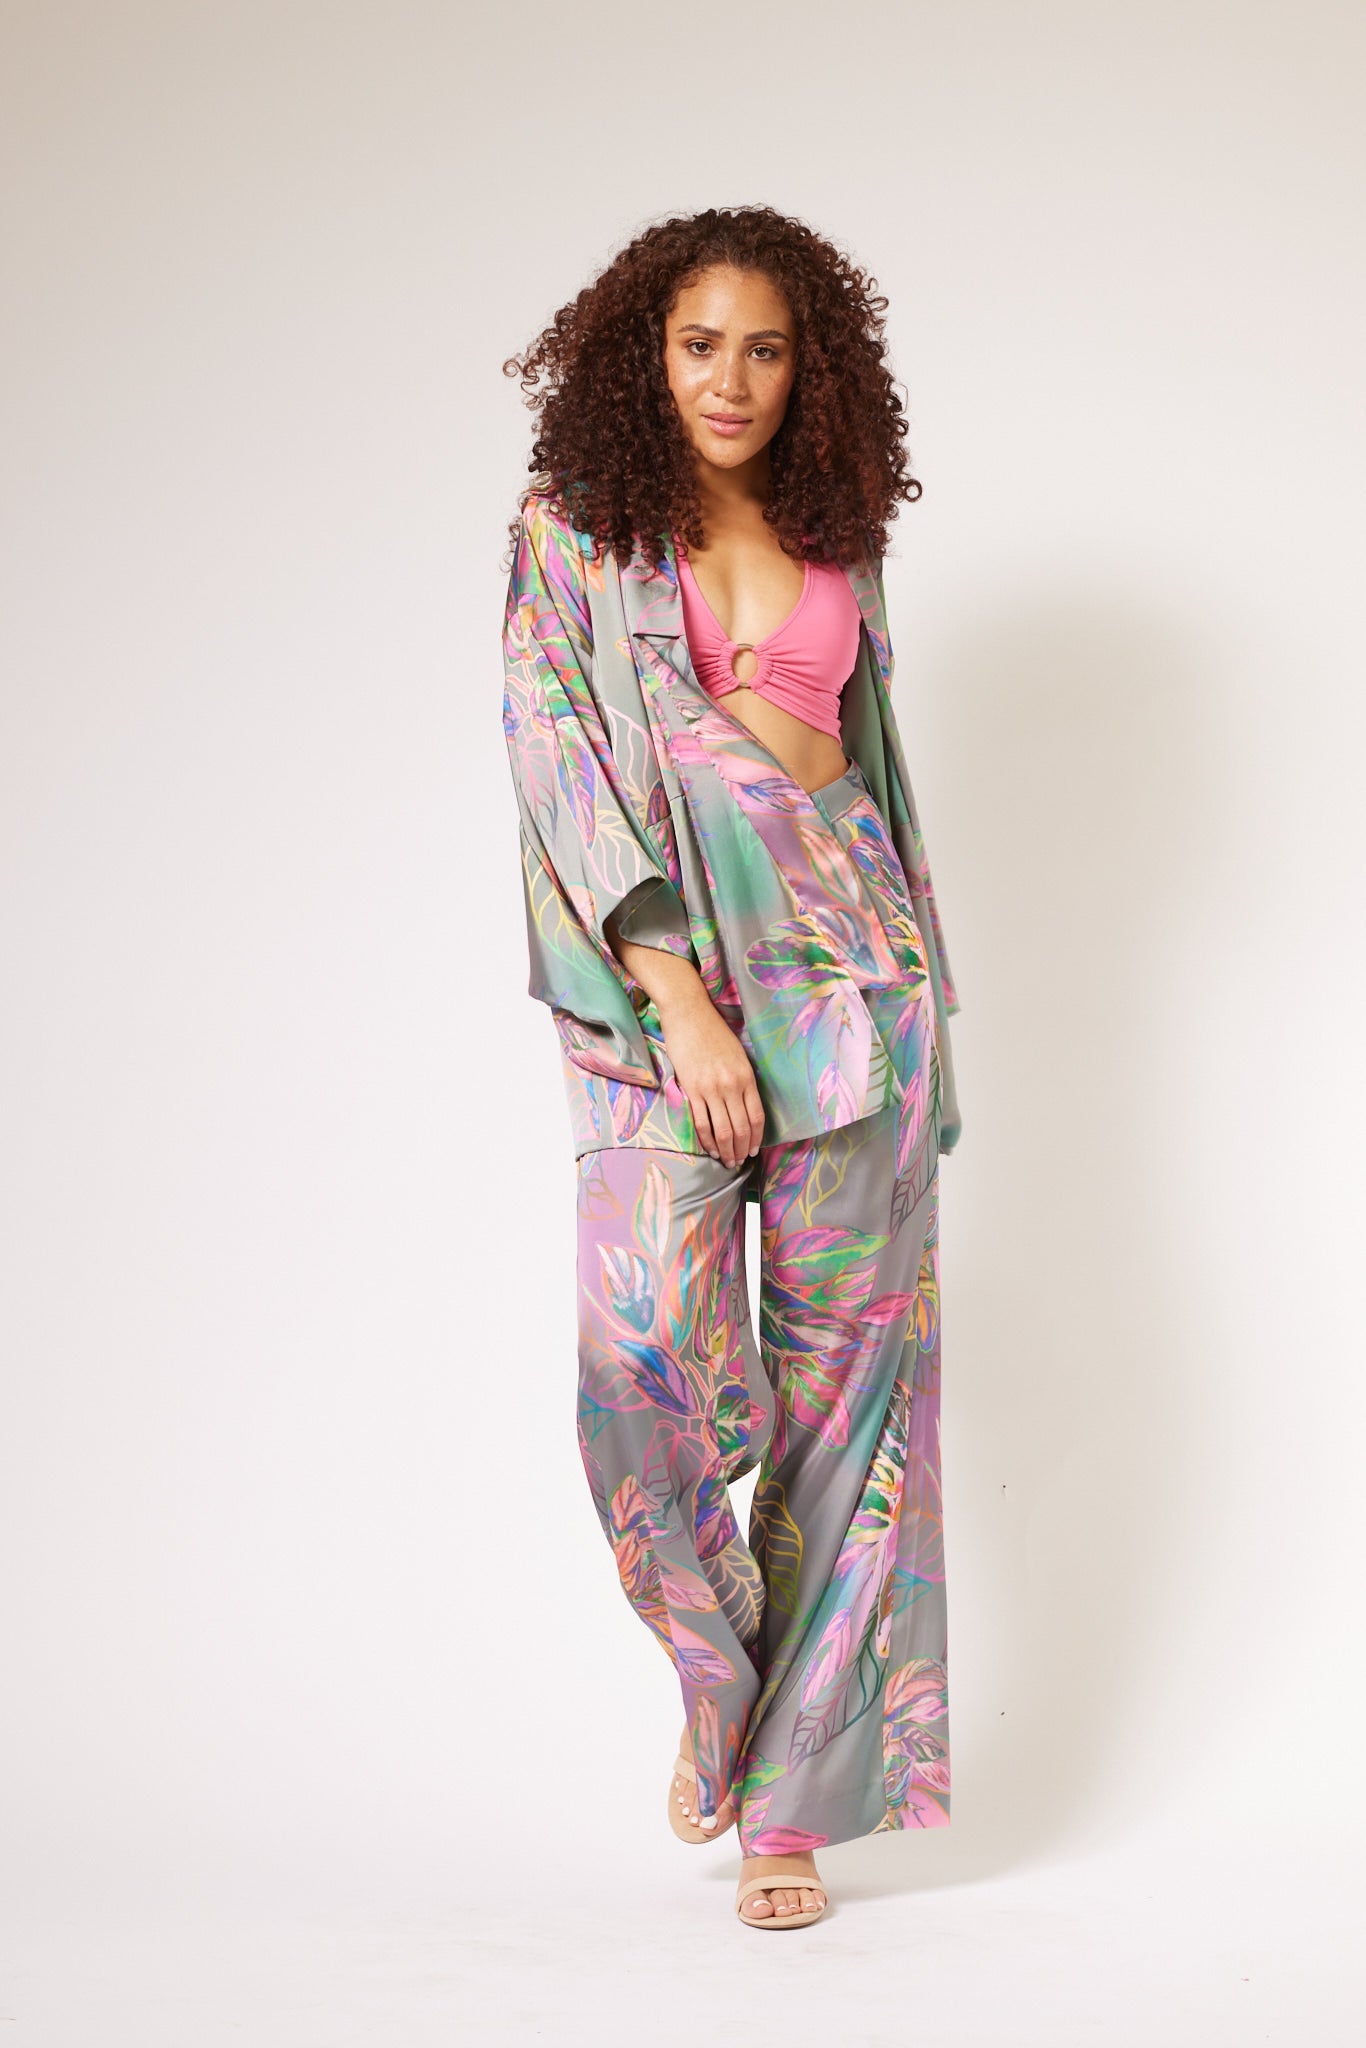 woman modelling all over multicolored tropical print kimono duster and matching yacht slacks made with recycled textiles 2